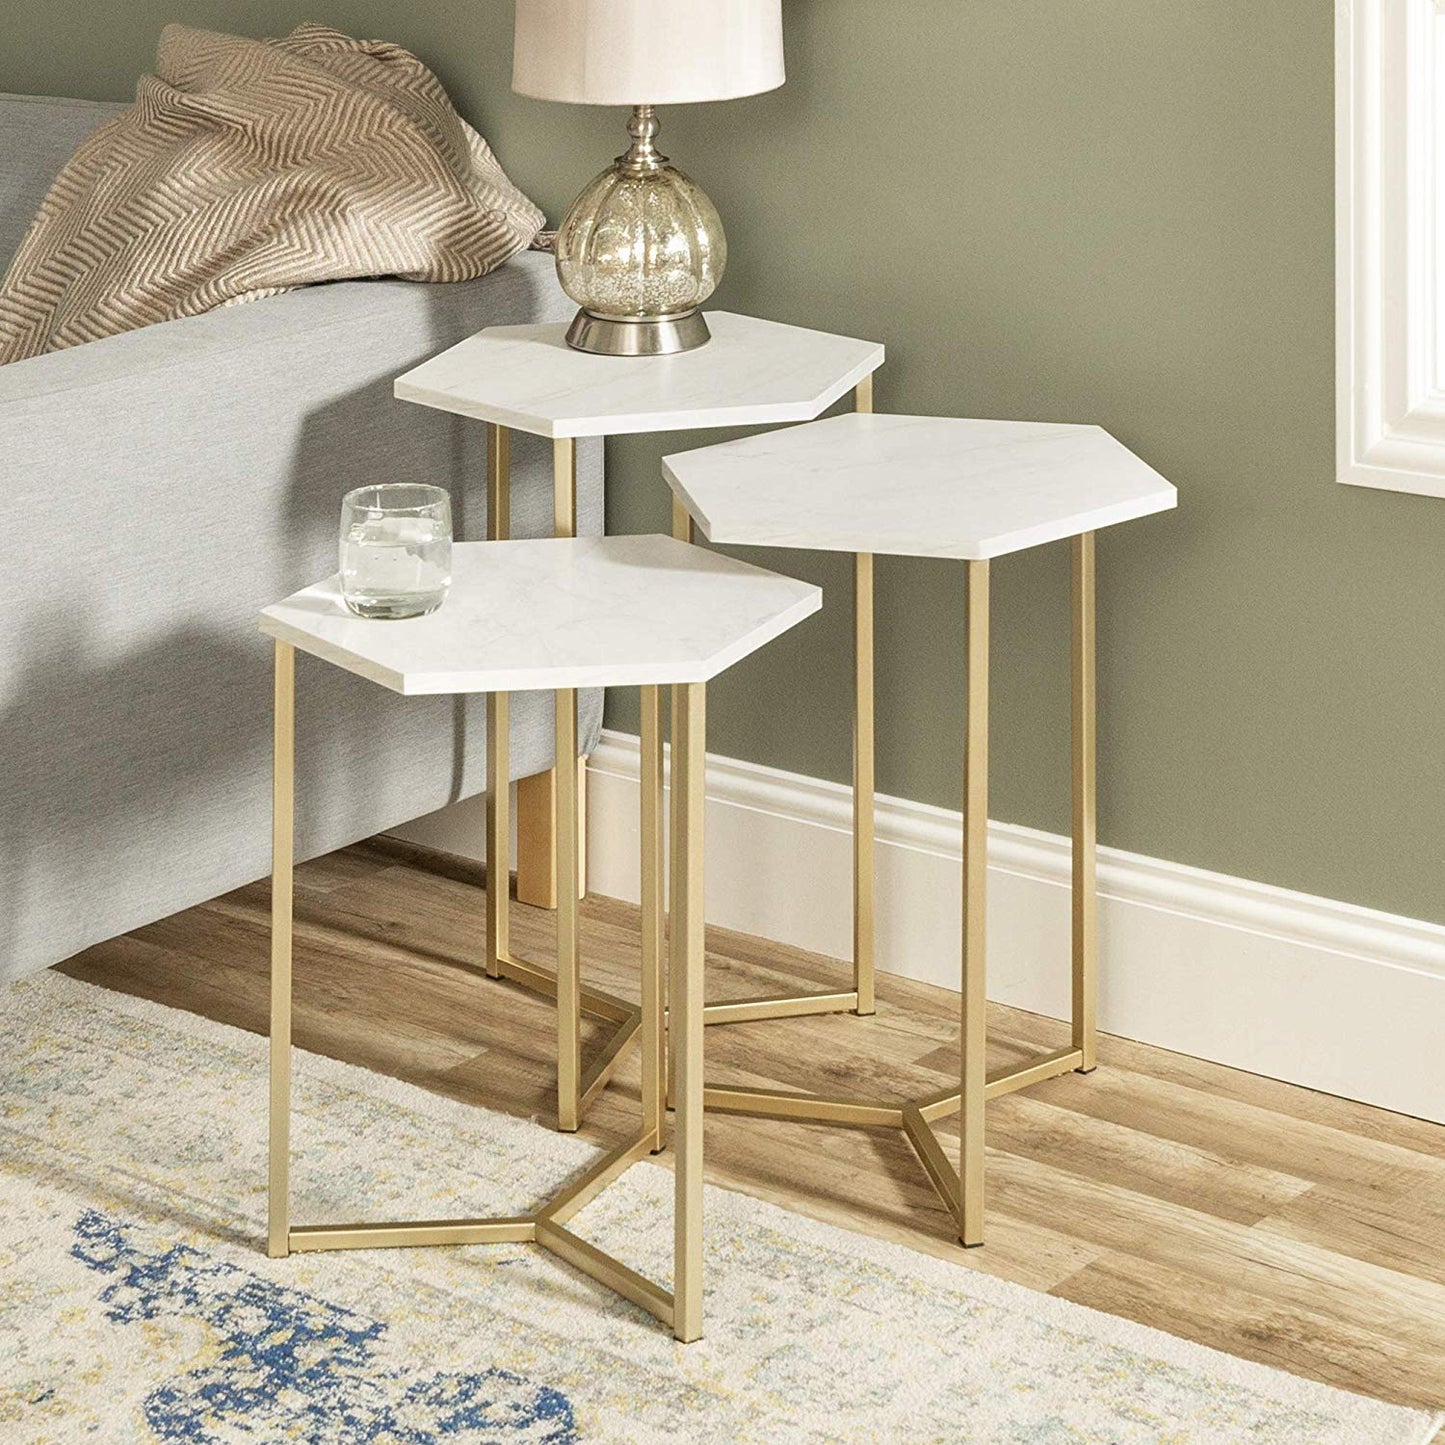 Side table - St.5